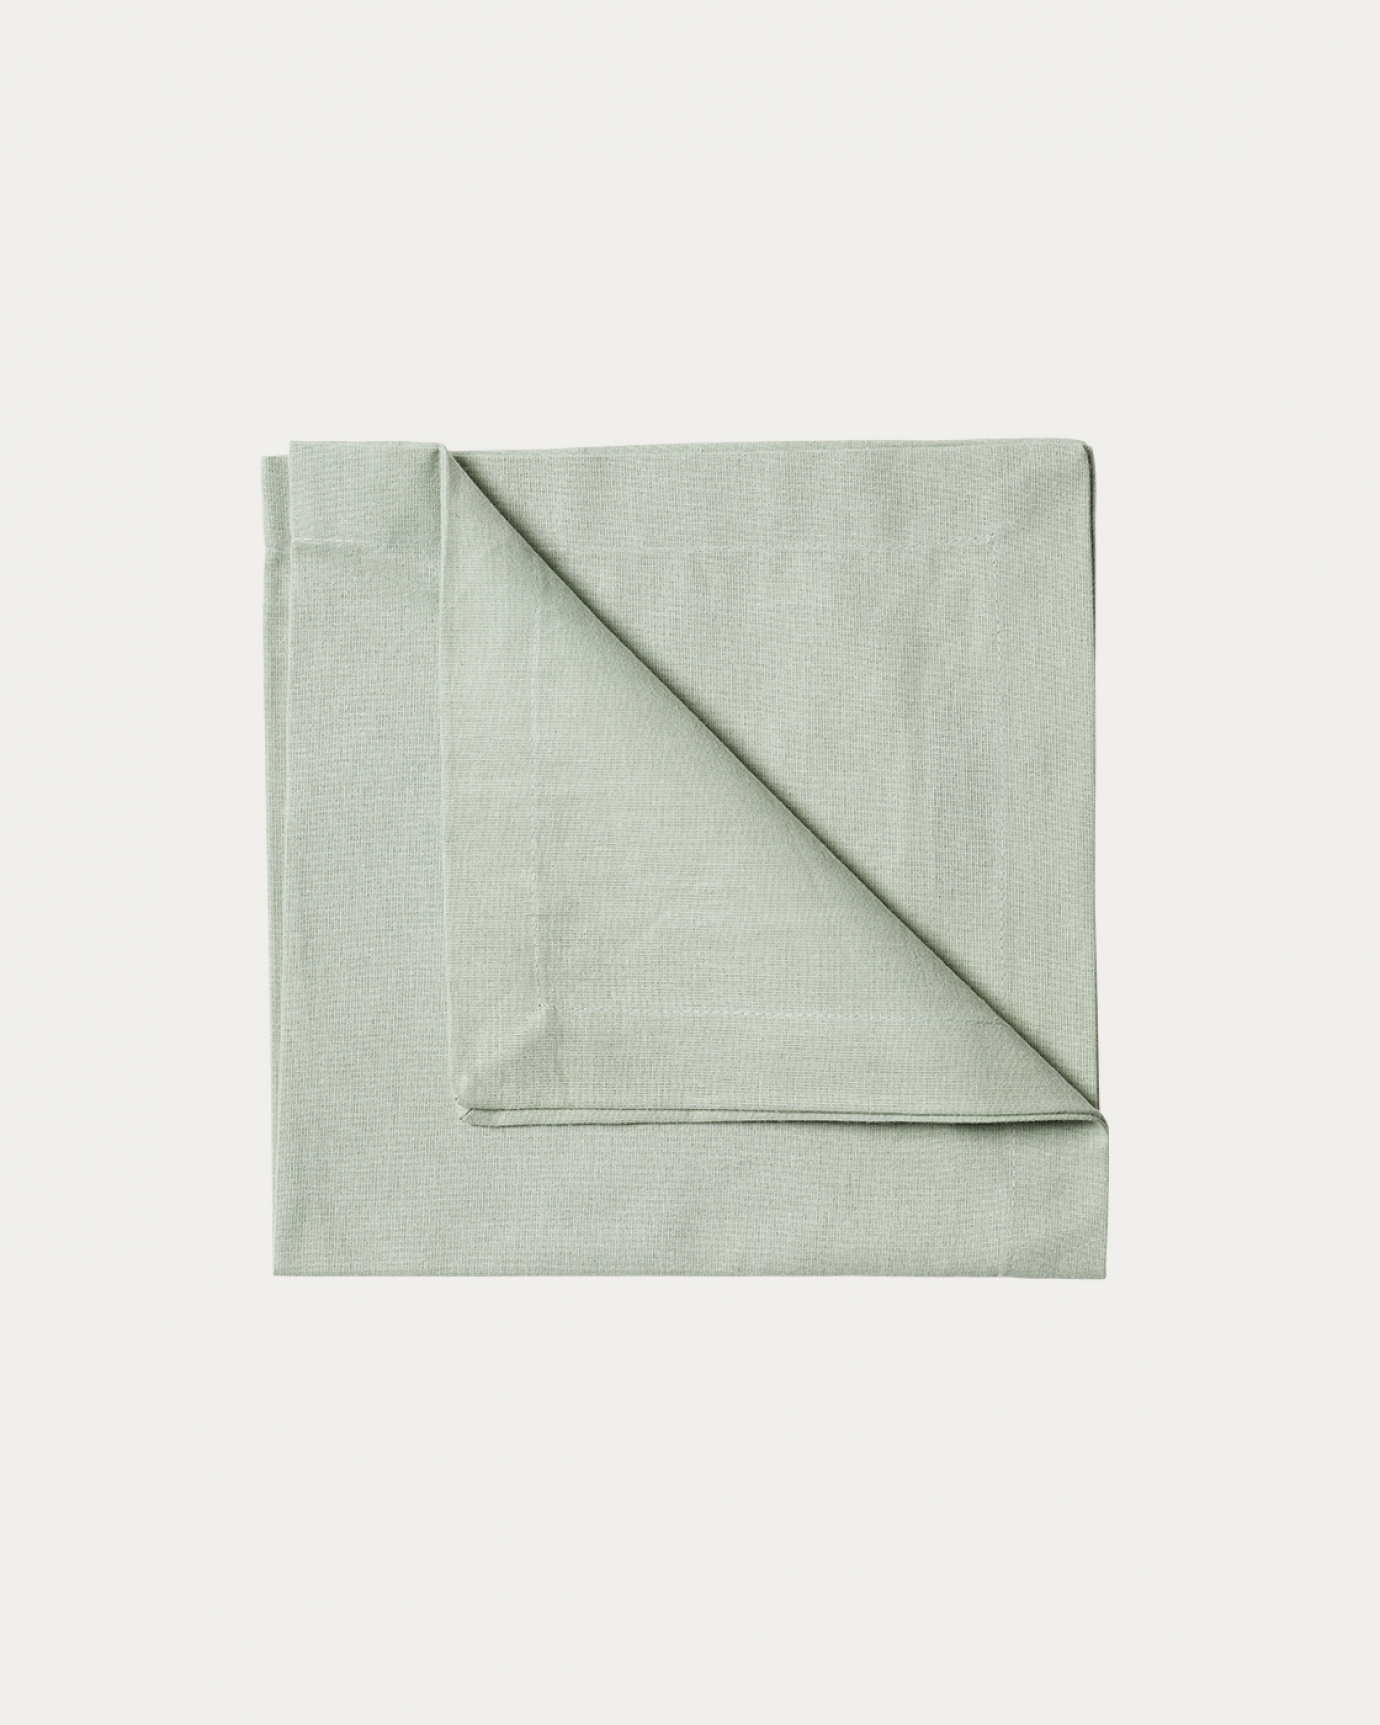 Product image light ice green ROBERT napkin made of soft cotton from LINUM DESIGN. Size 45x45 cm and sold in 4-pack.